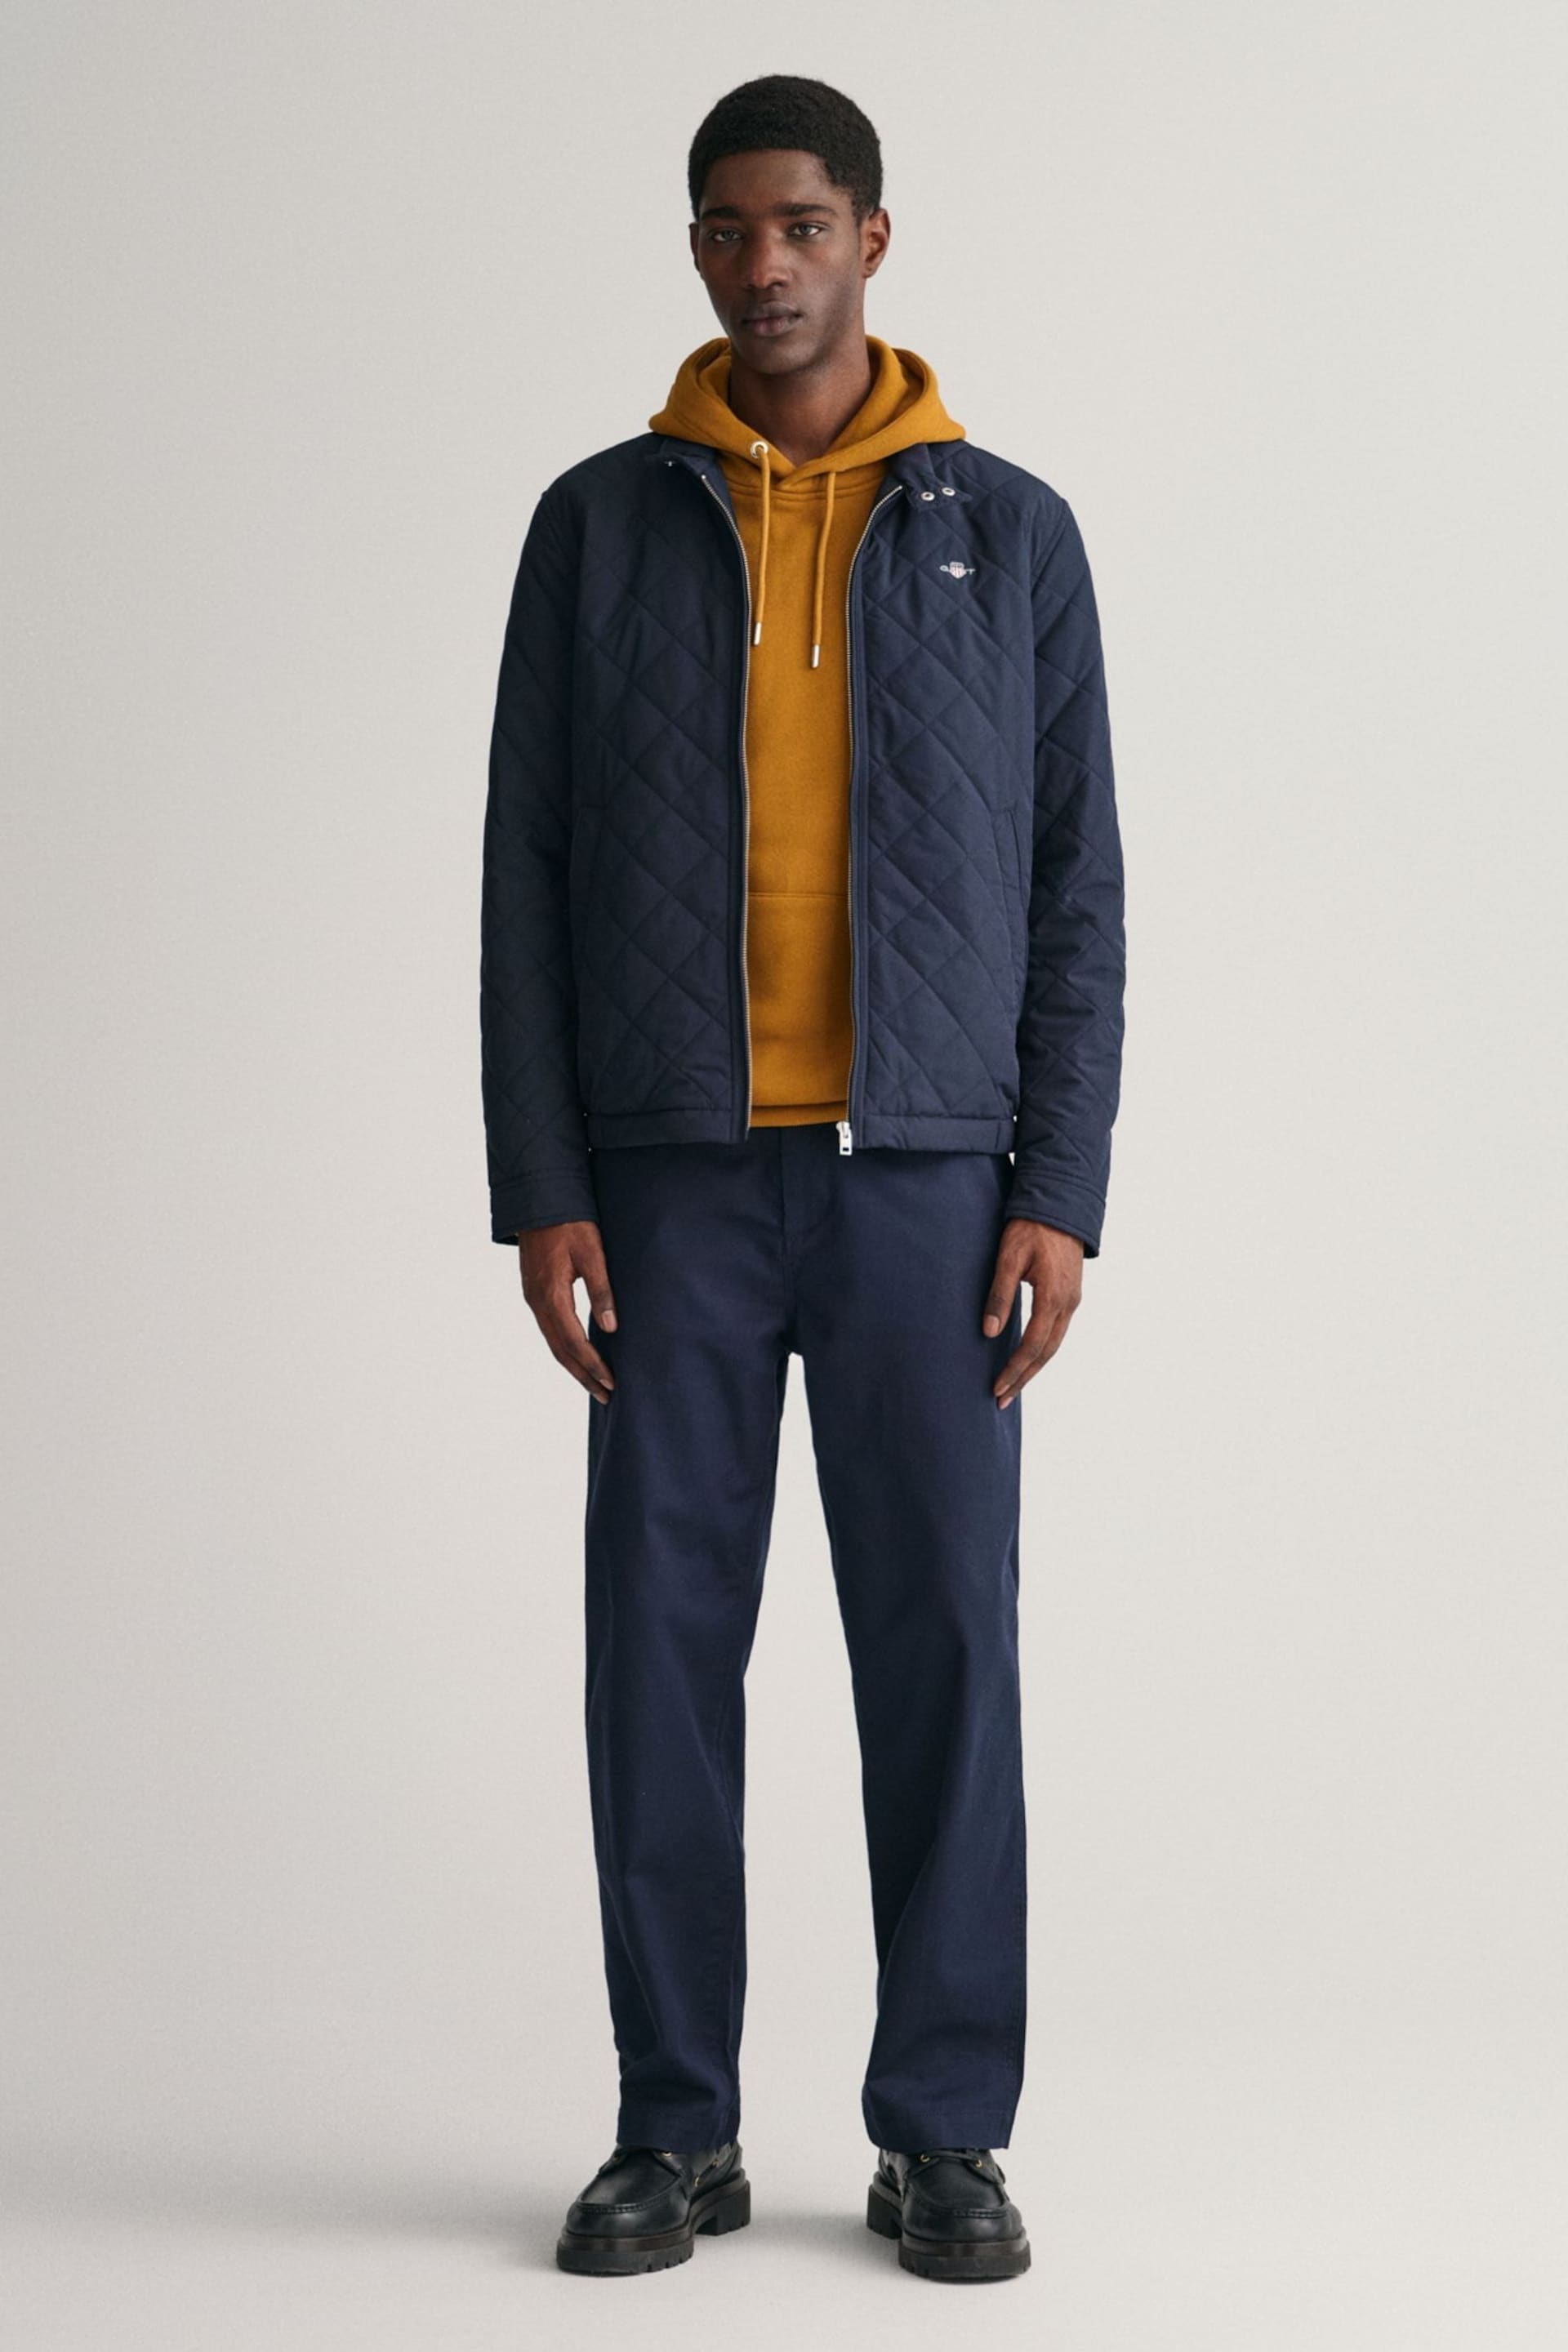 GANT Blue Quilted Windcheater Jacket - Image 3 of 7